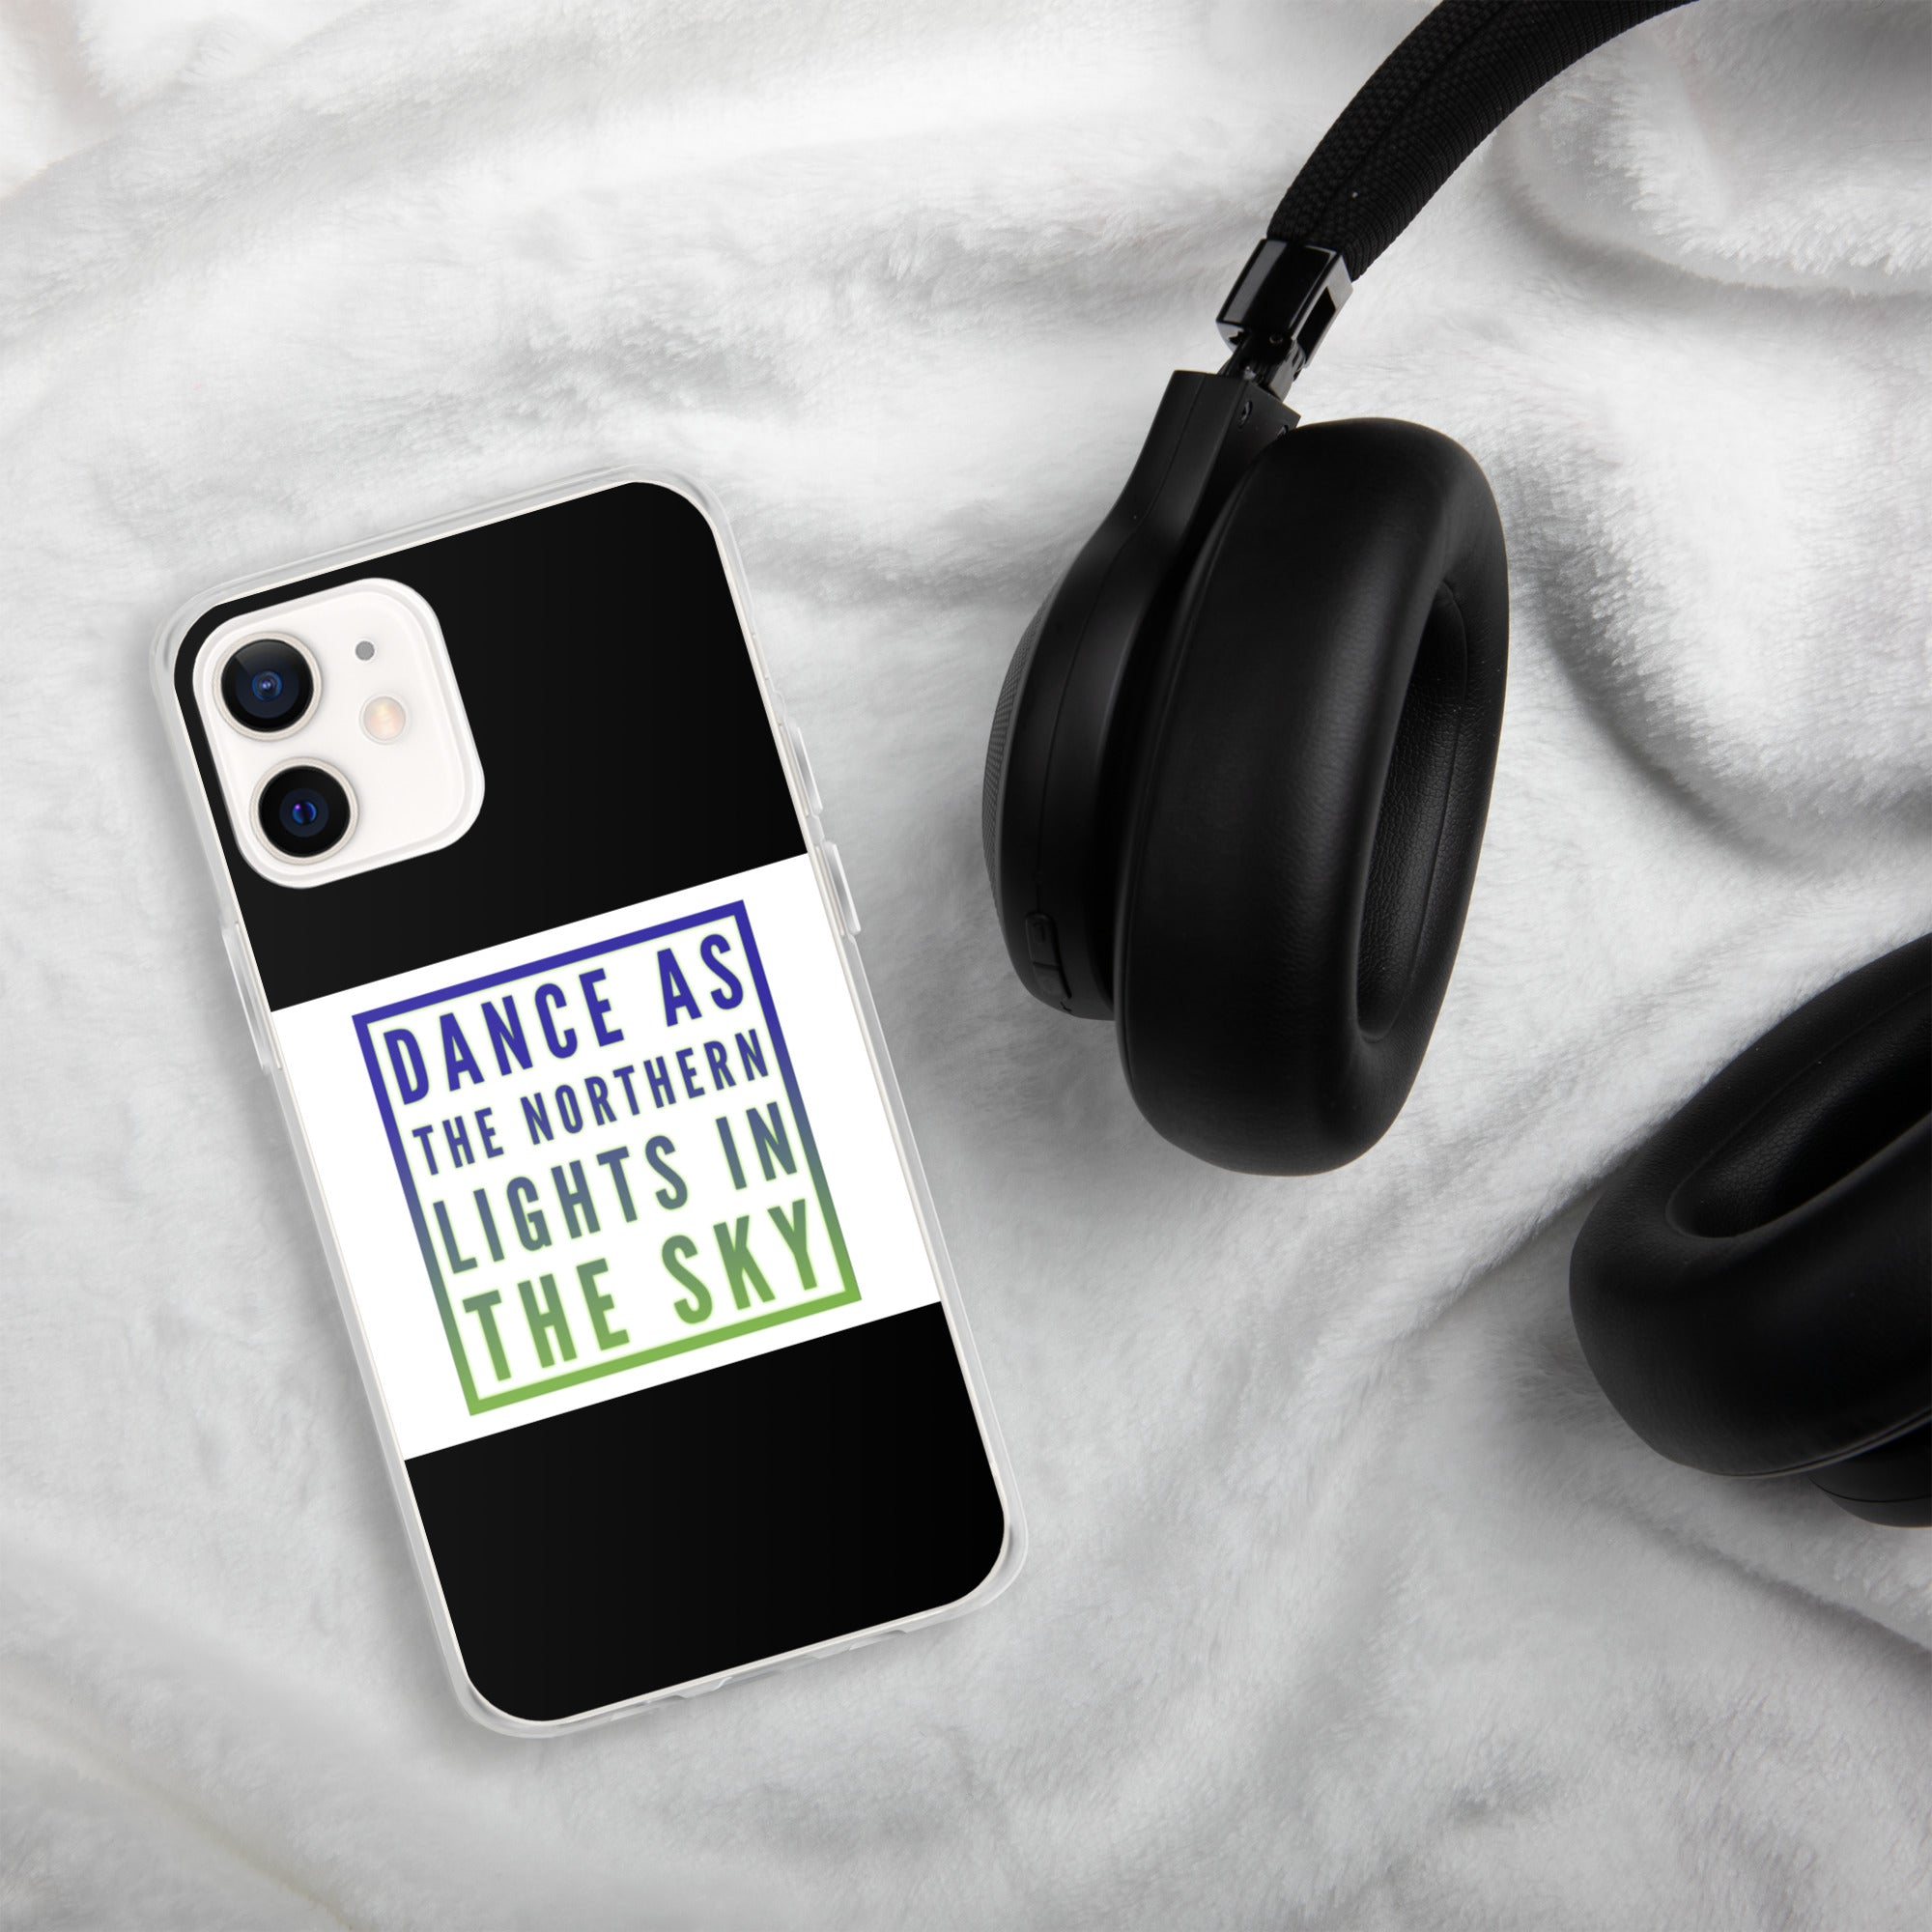 GloWell Designs - iPhone Case - Motivational Quote - Dance As The Northern Lights - GloWell Designs